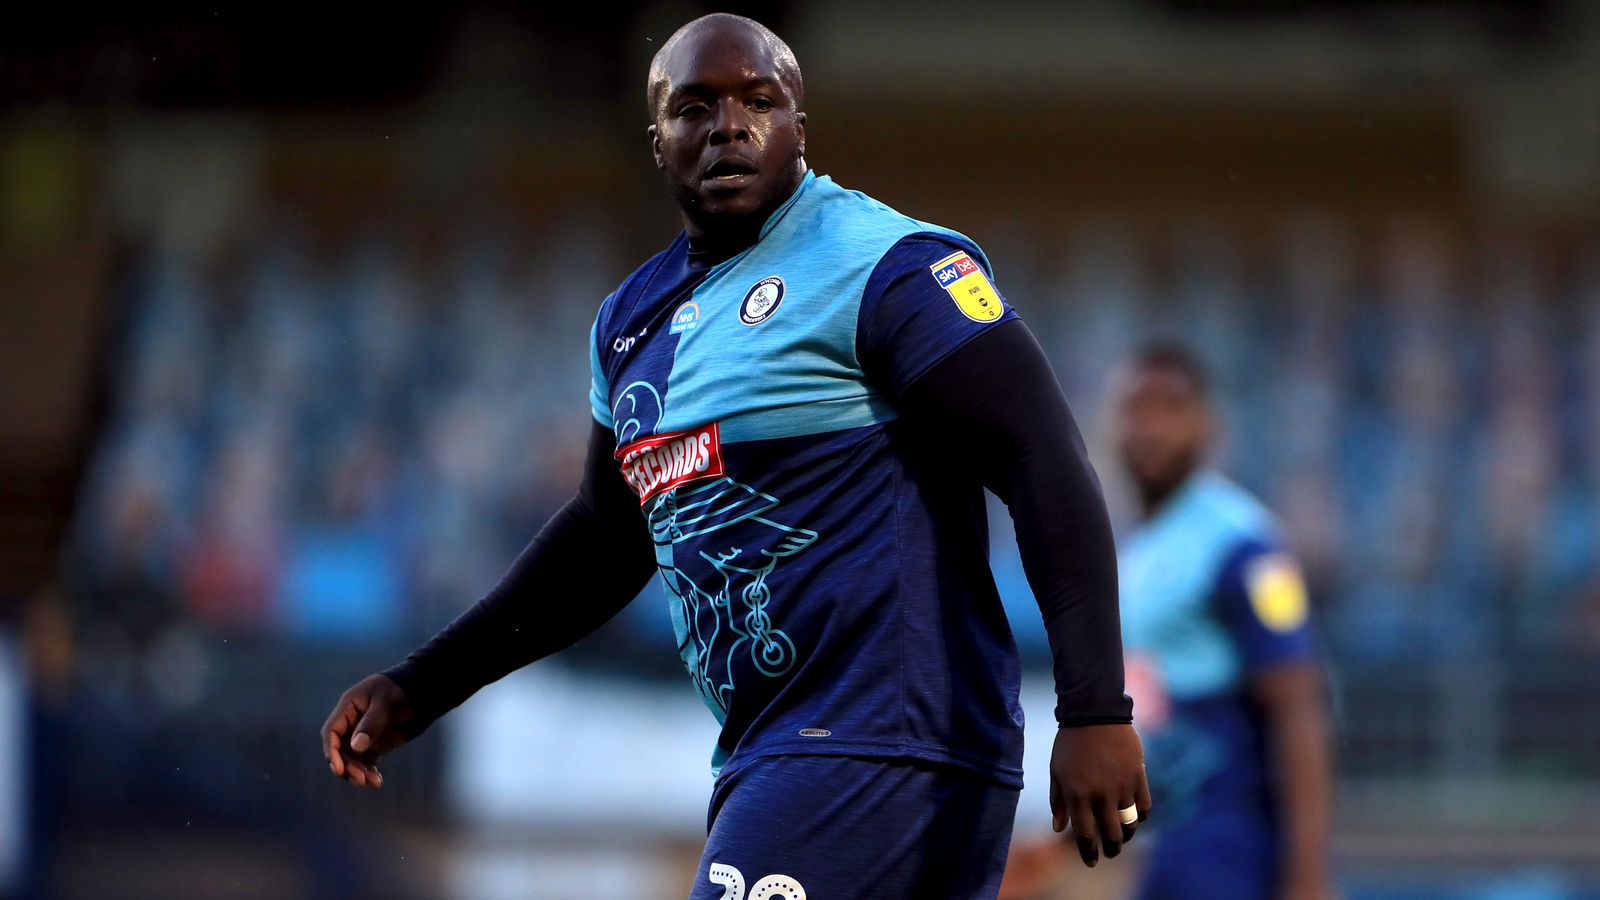 nikkel gnist gift Adebayo Akinfenwa says he was called a 'Fat Water Buffalo' during play-off  match | Football News | Sky Sports